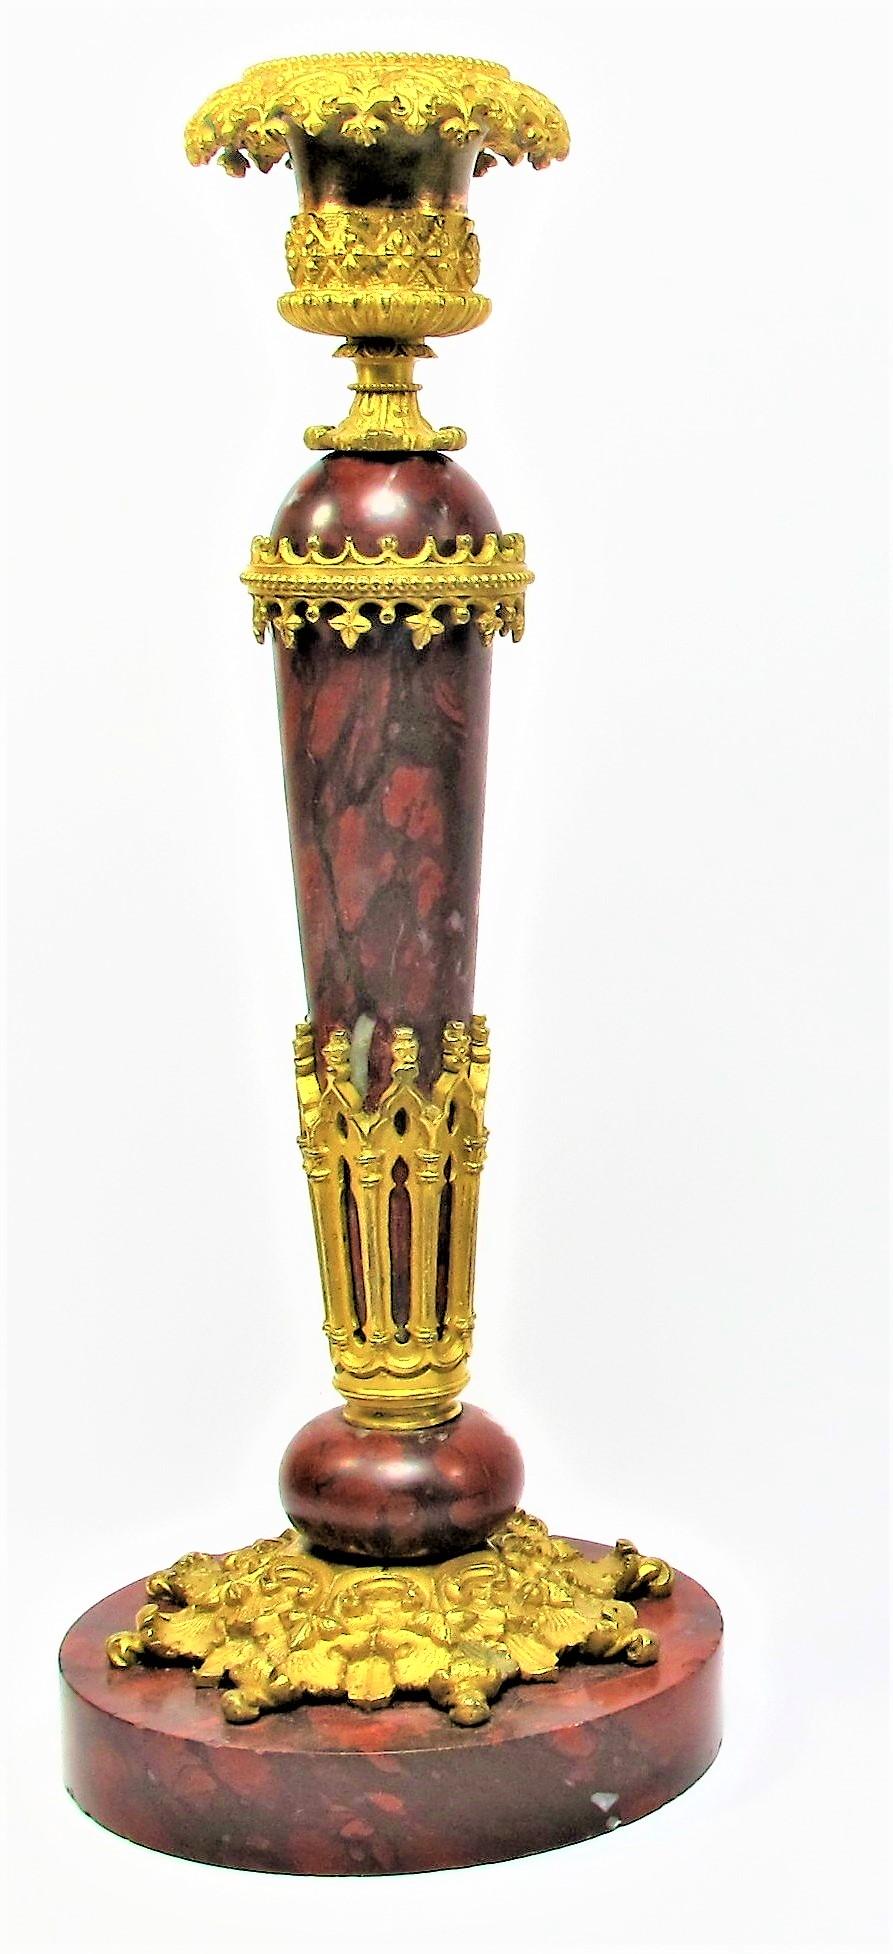 Beautiful pair of candlesticks from 1830 period in gilt bronze and cherry red marble neo-gothic style. The bronze decorations representing architectural elements have been used in the service of red cherry marble in order to sublimate the aesthetic